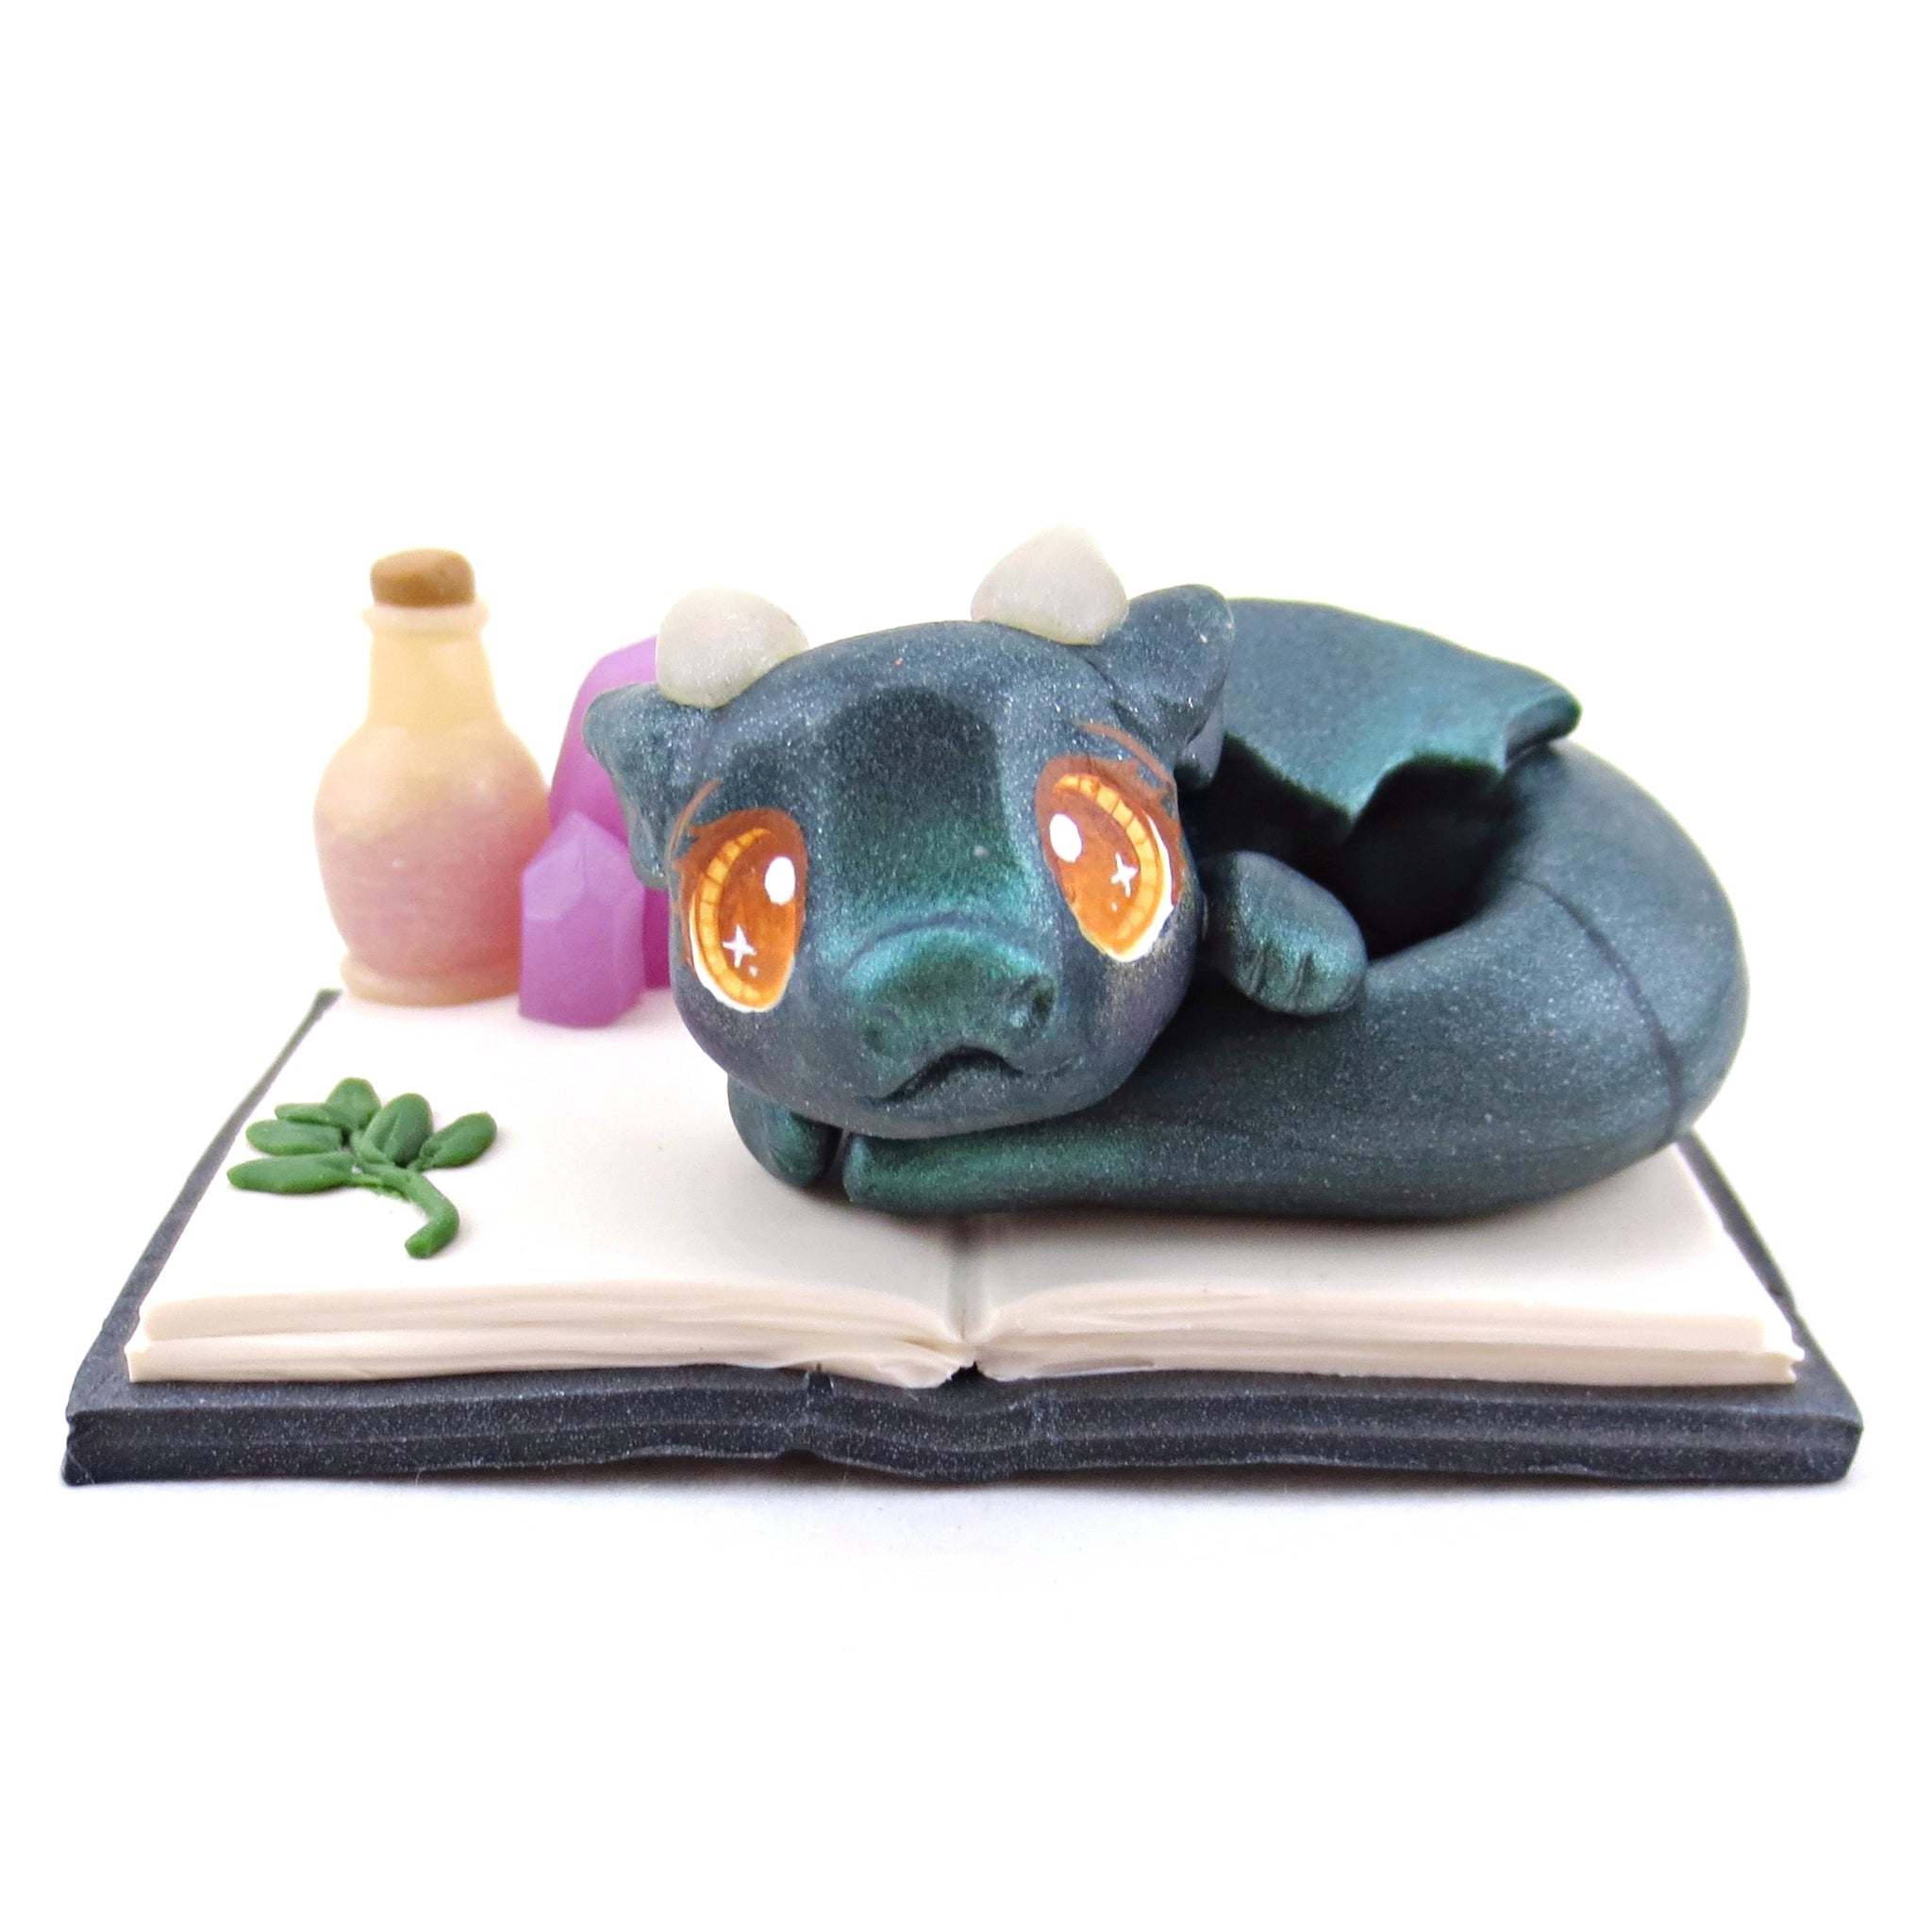 Baby Dragon Familiar with Book Stand Figurine - Polymer Clay Halloween Collection